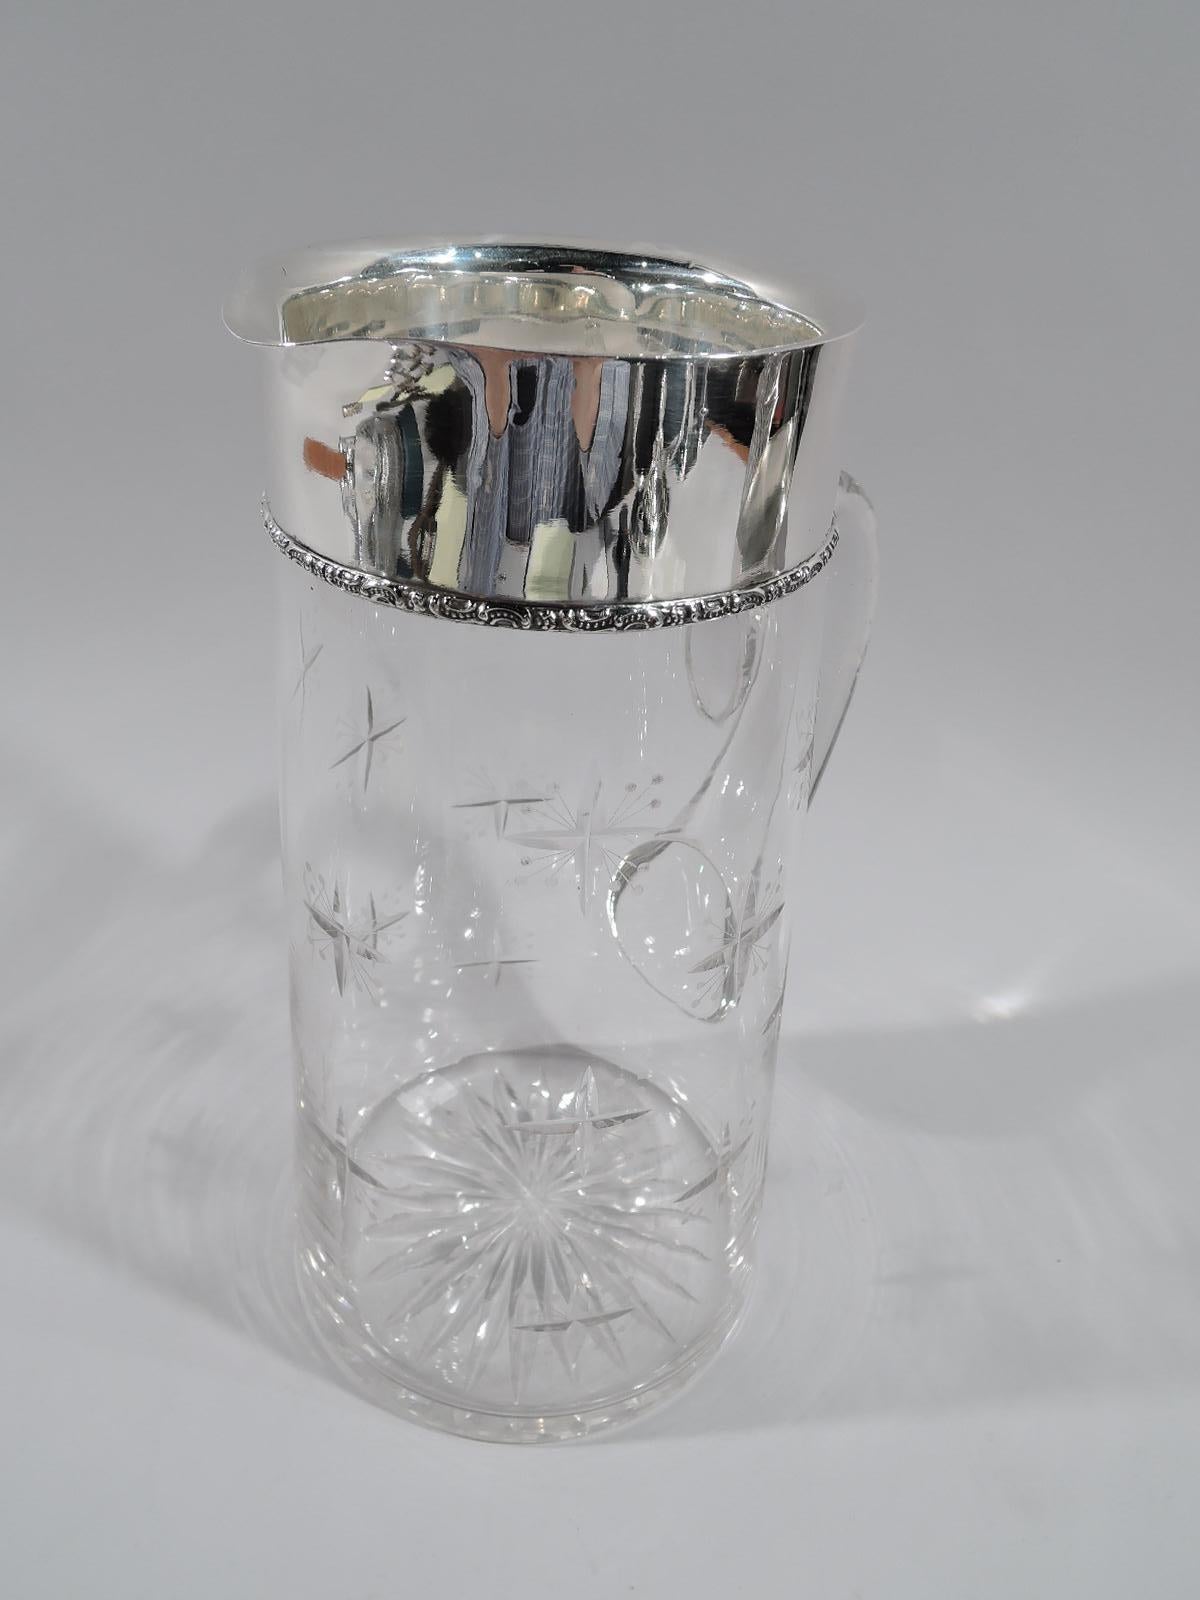 American Art Deco sterling silver and glass bar pitcher, circa 1920. Upward tapering body with looping scroll handle. Star cut to underside; on body cut crosses sprouting acid-etched beaded stalks. Sterling silver collar with tooled scroll and